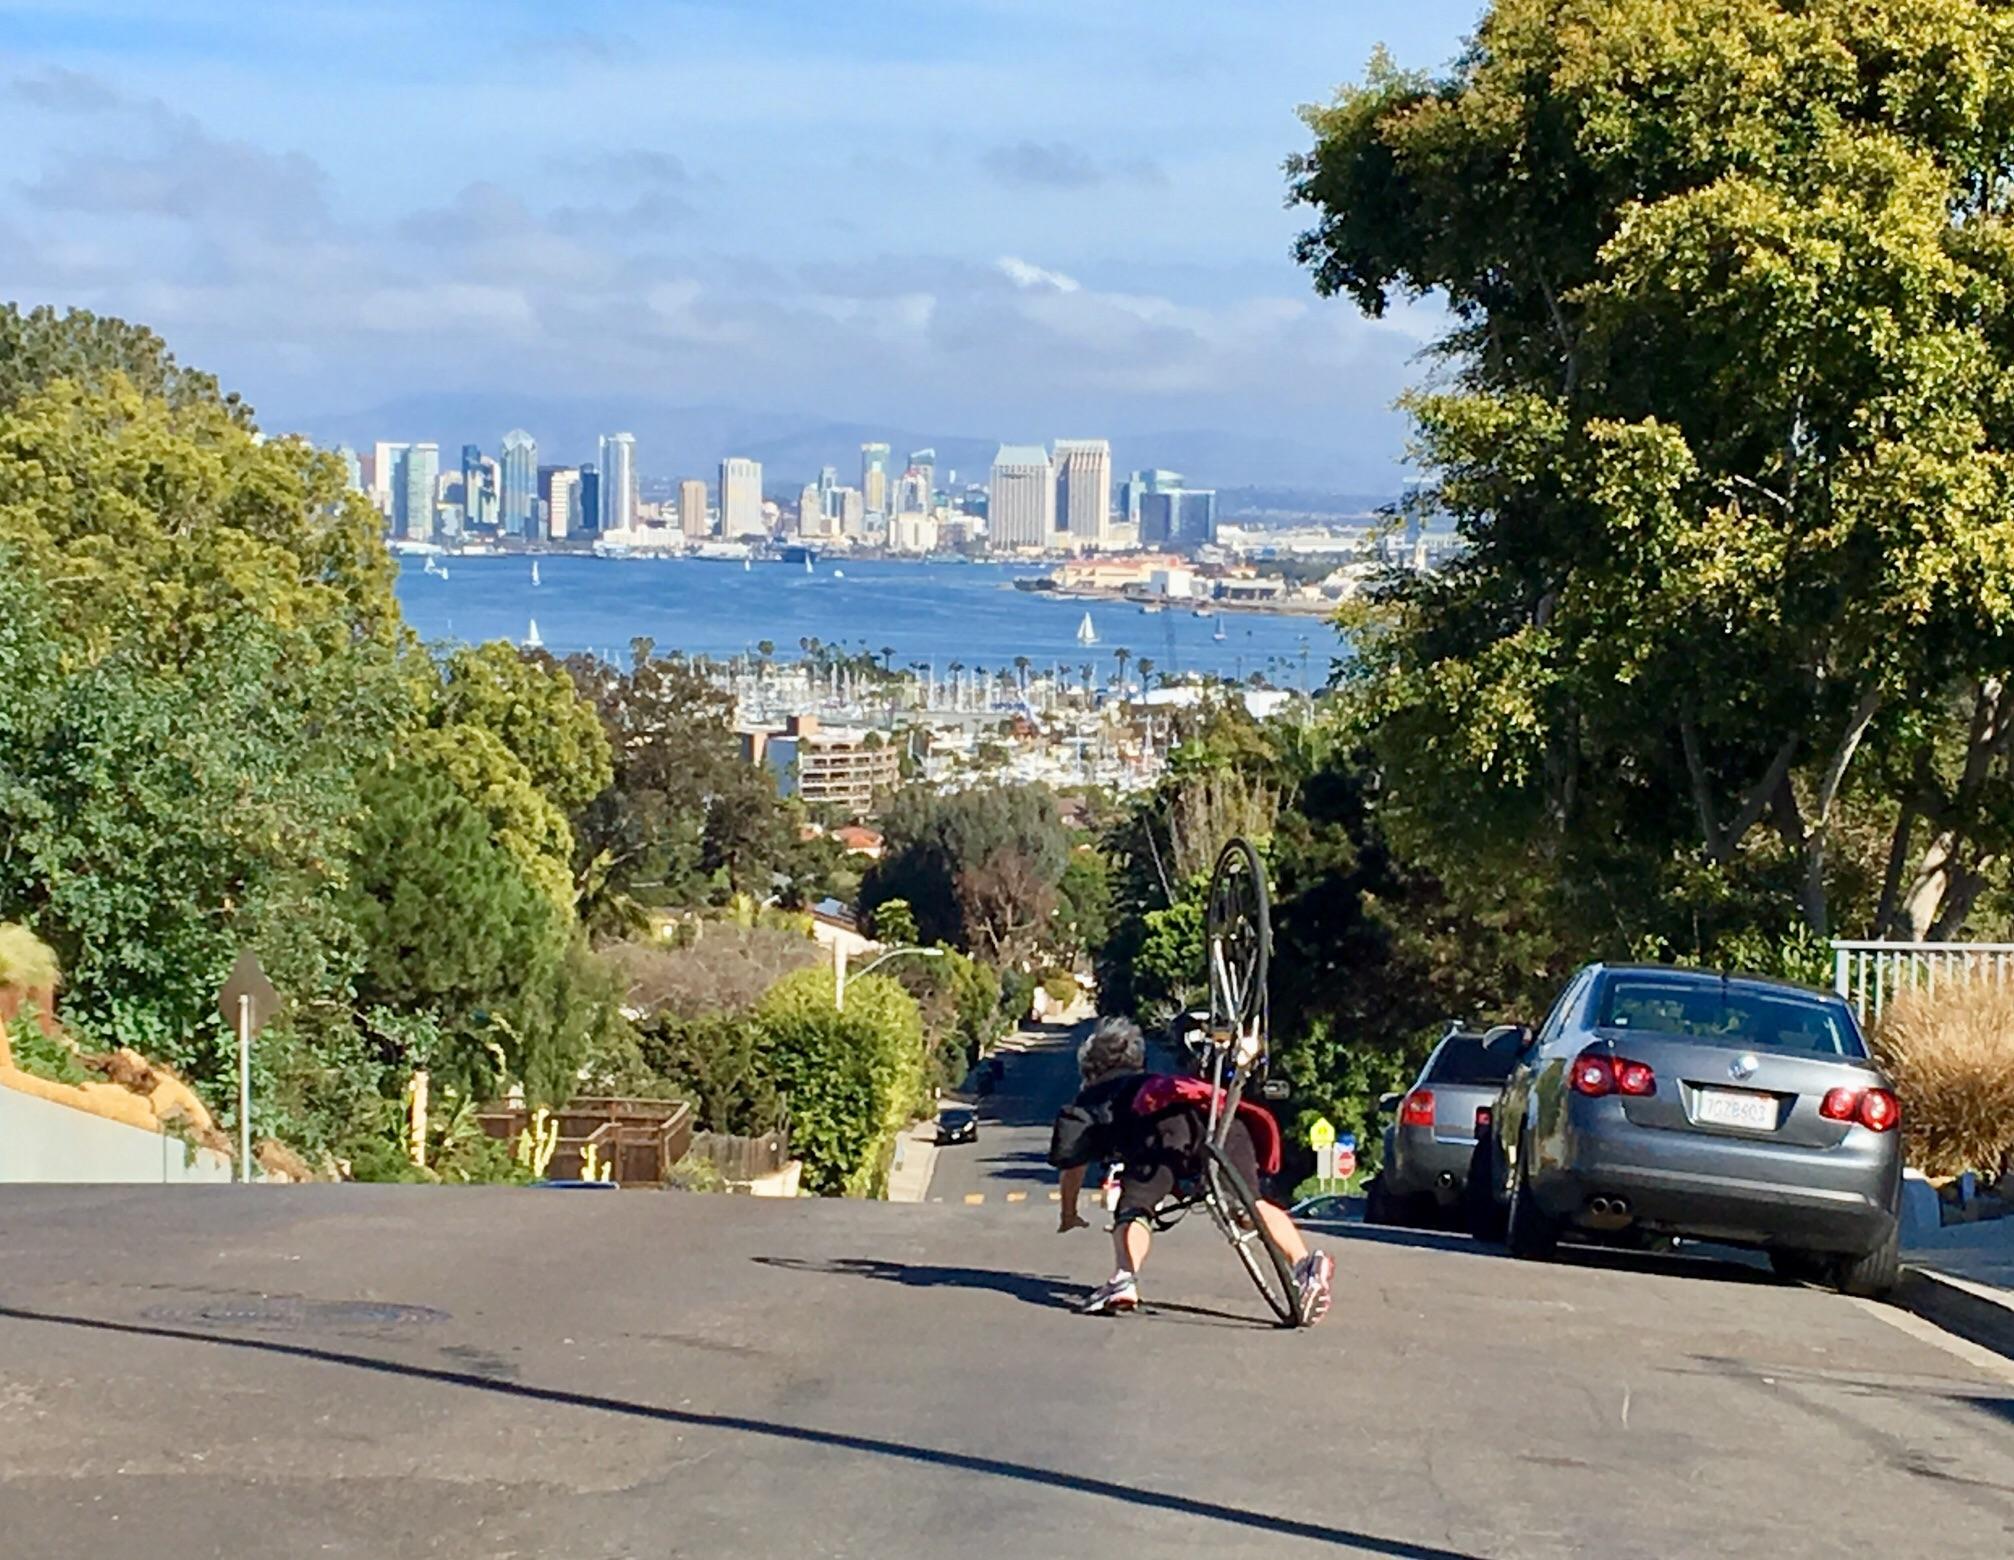 Friend taking pic of me with San Diego in background right when I go ass over teakettle. No worries just bruised— worth it